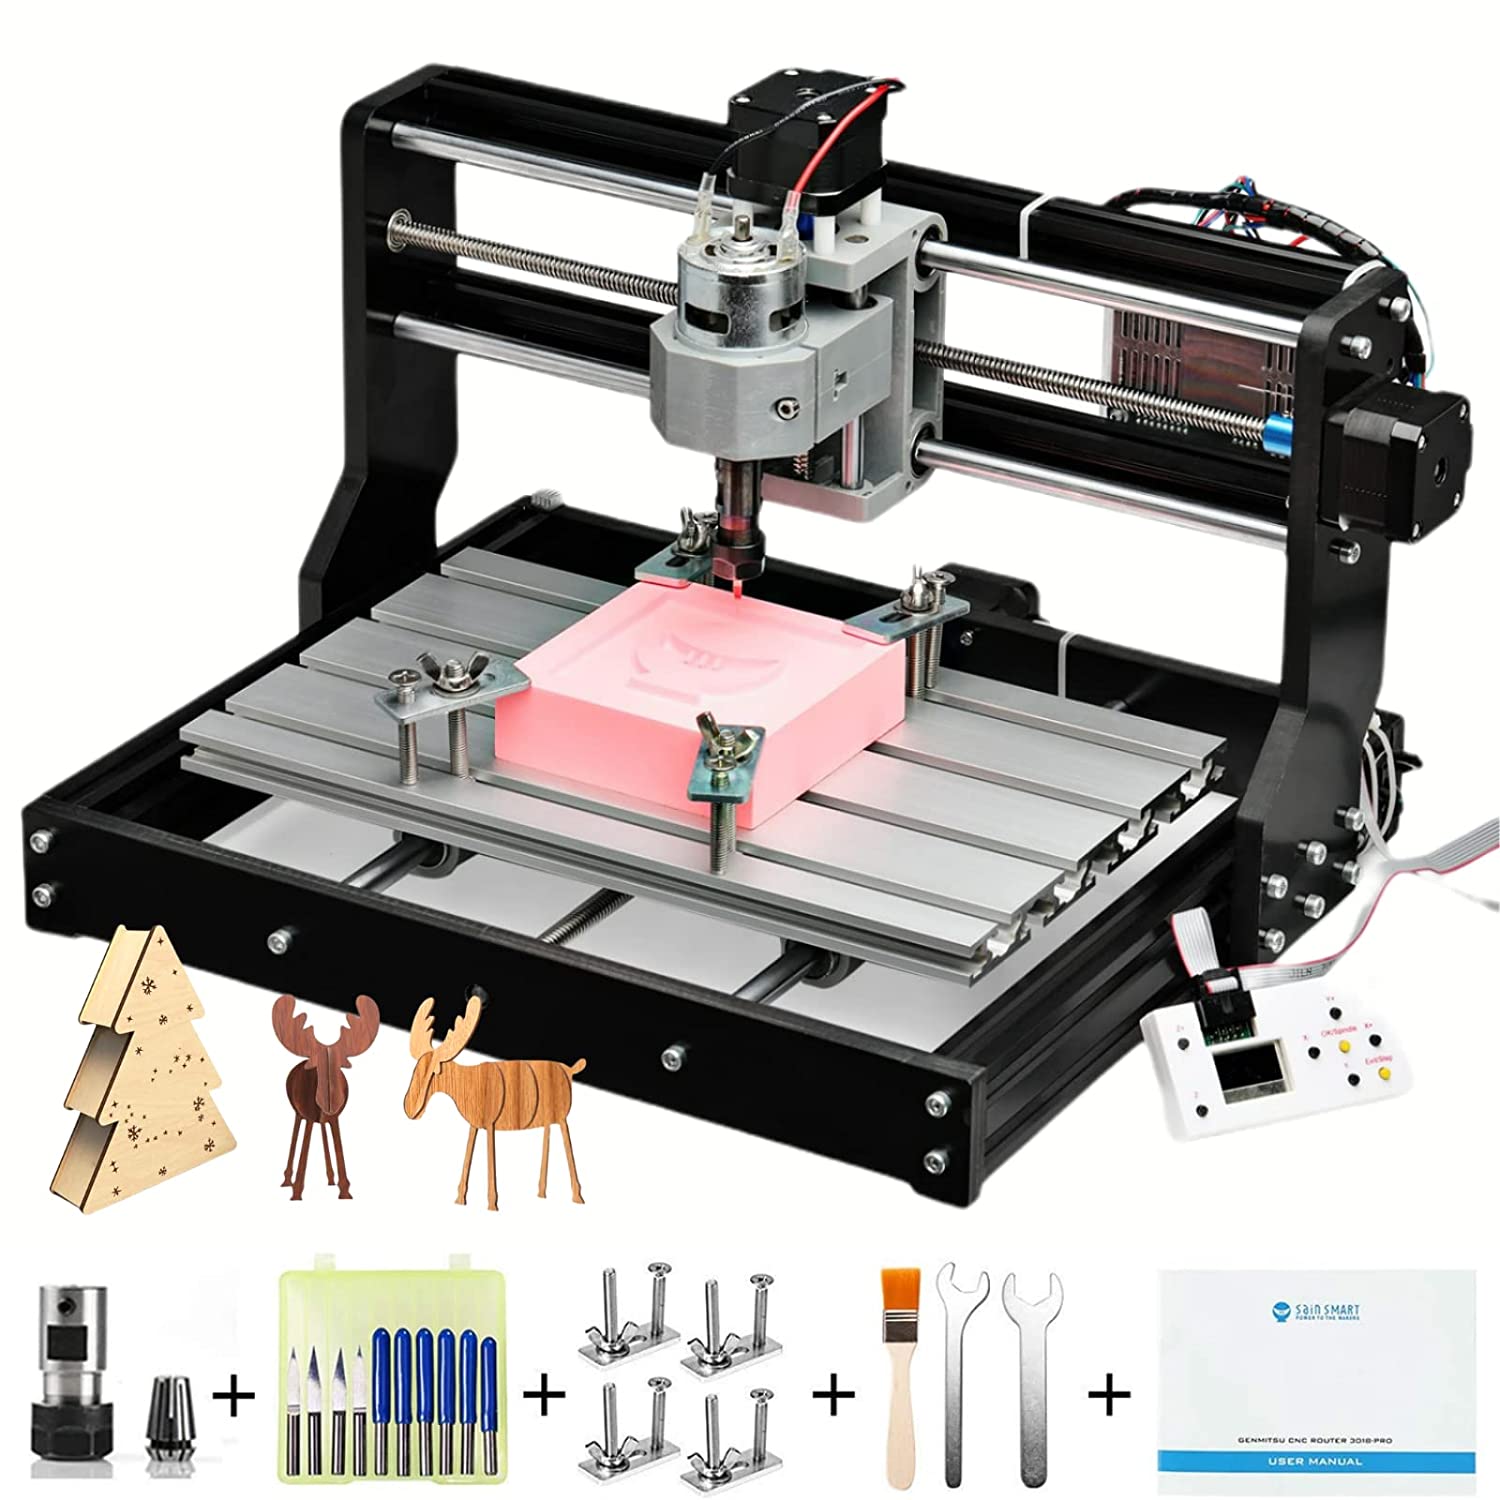 The Best CNC Router Kit for the Money: The Genmitsu 3018-PRO